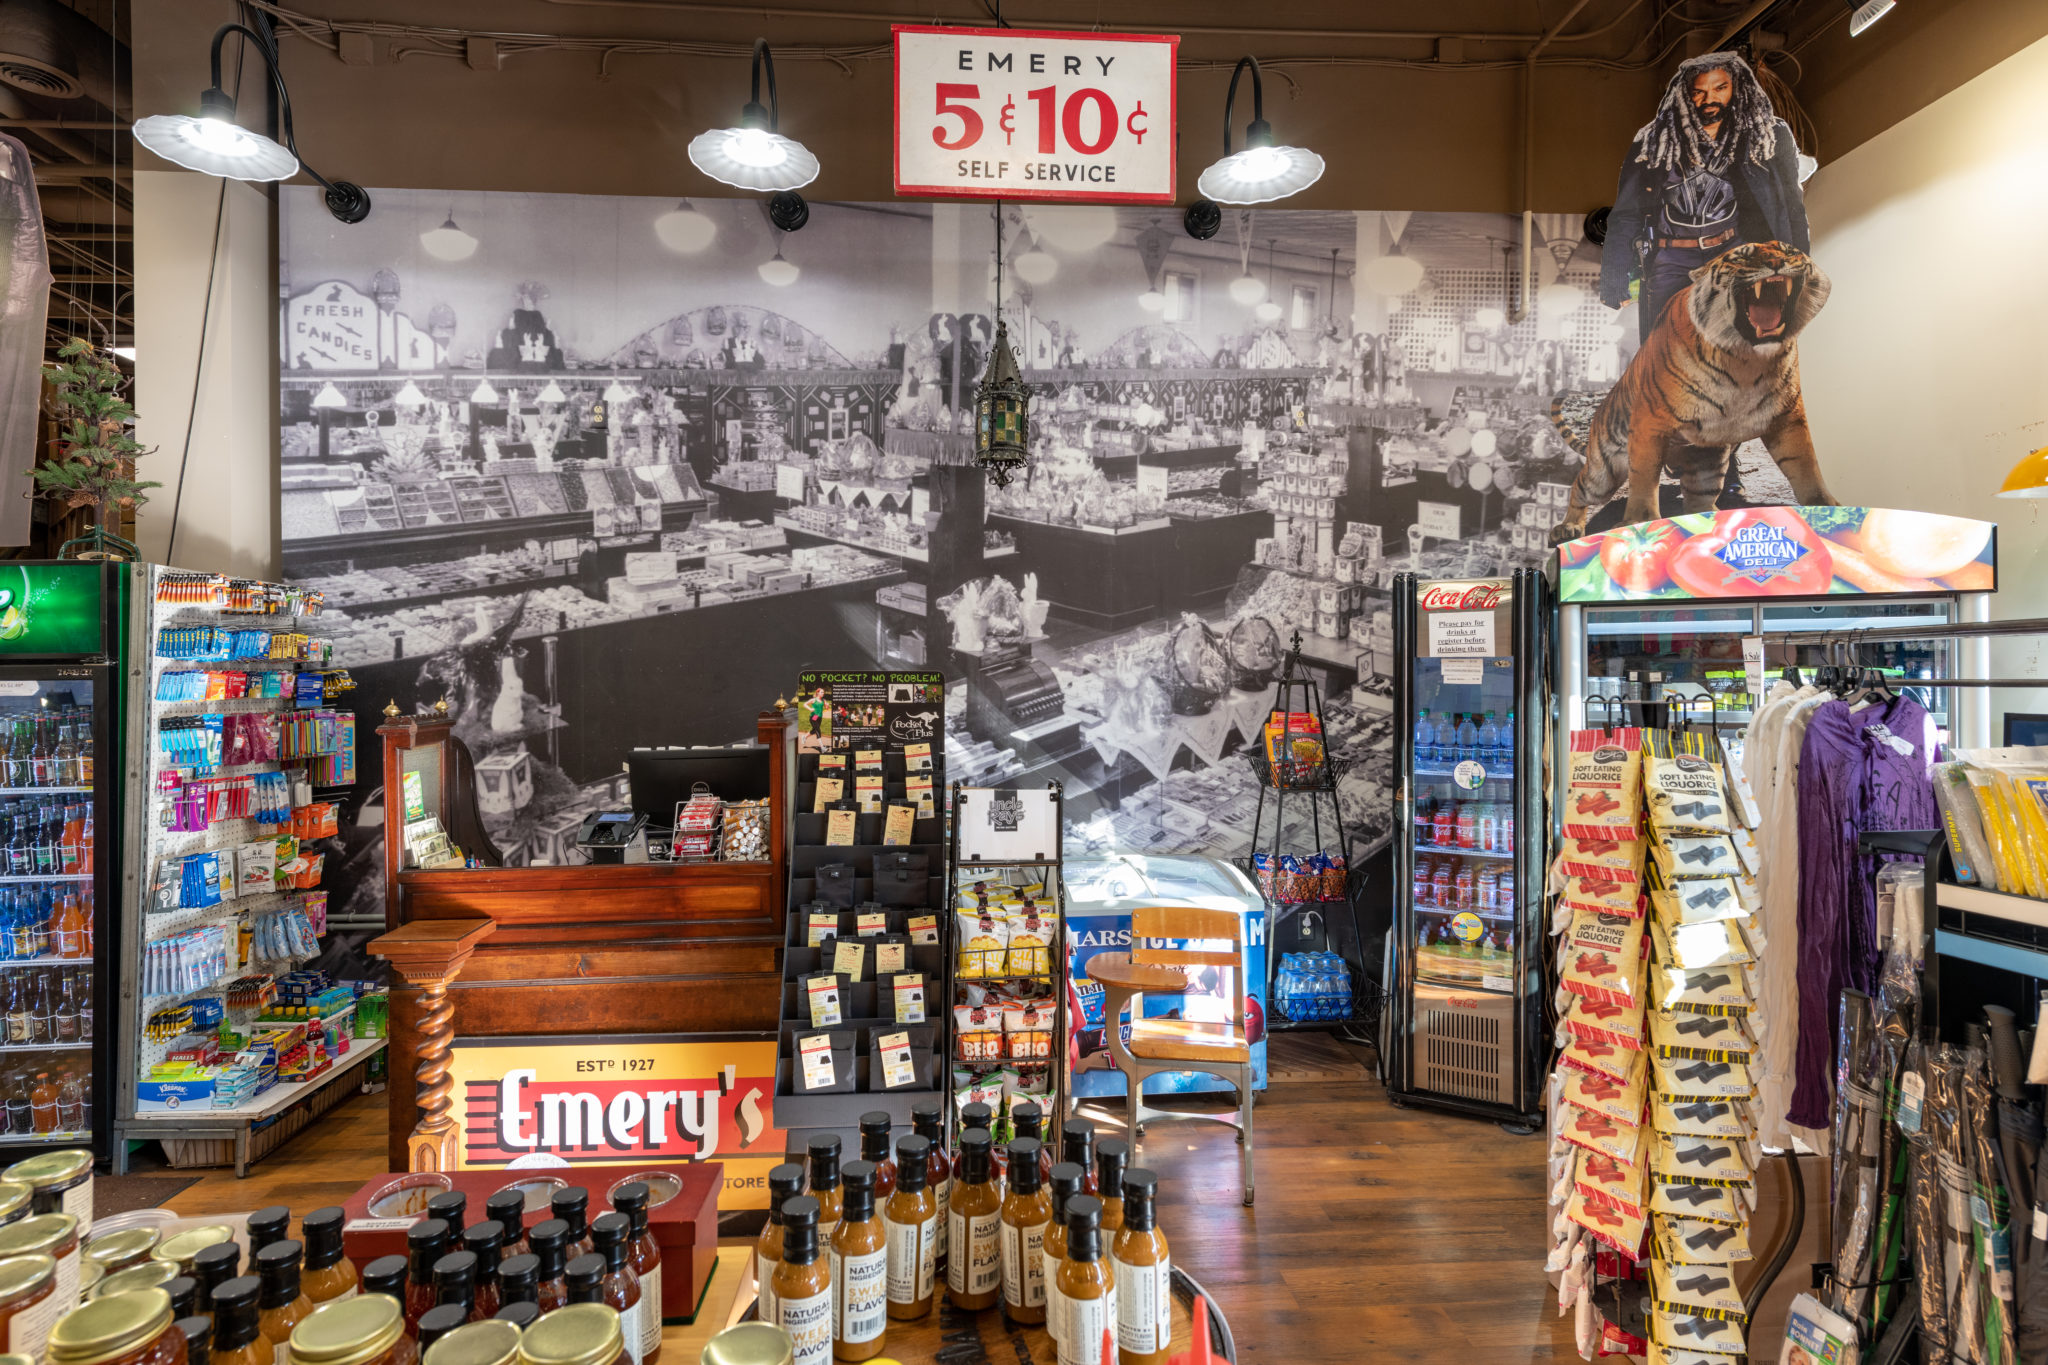 Displays filled with products inside Emery's 5 & 10